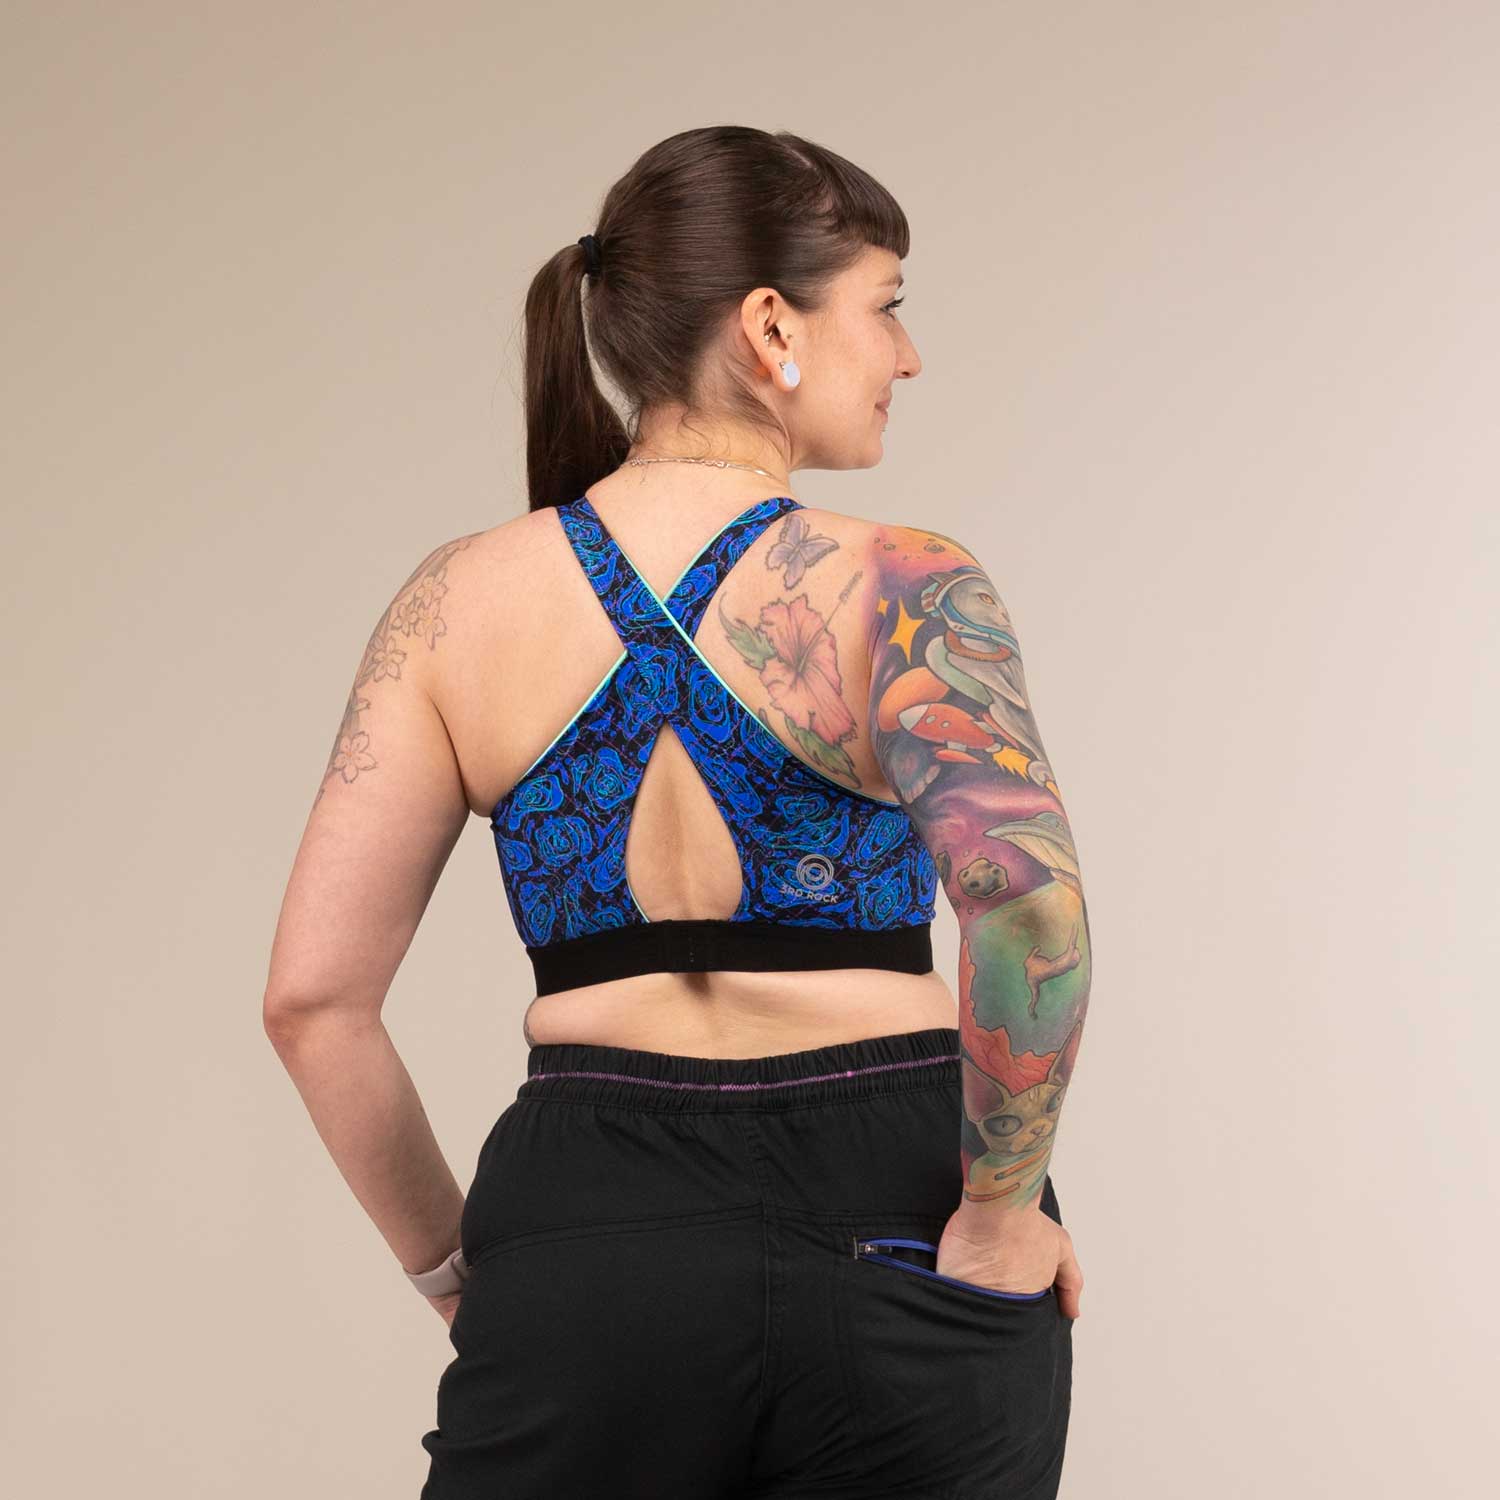 EQUINOX GEO JAGUAR | Reversible Recycled Sports Bra | 3RD ROCK Clothing -  Laura is a 32E with a 30"underbust, 36" overbust and wears a size 14 F